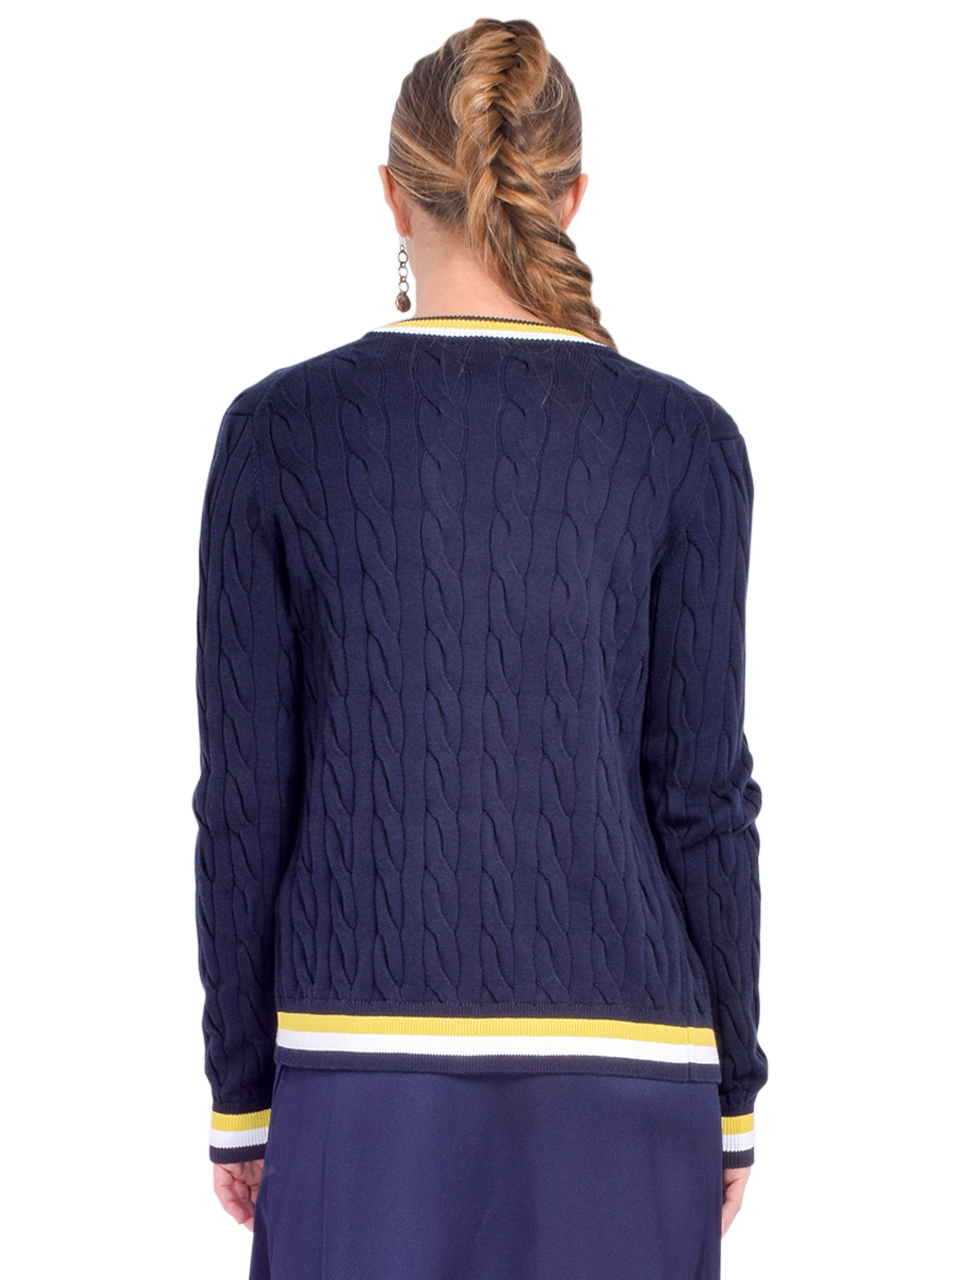 MINNIE ROSE Cotton Cable Knit Cardigan in Navy Back View 